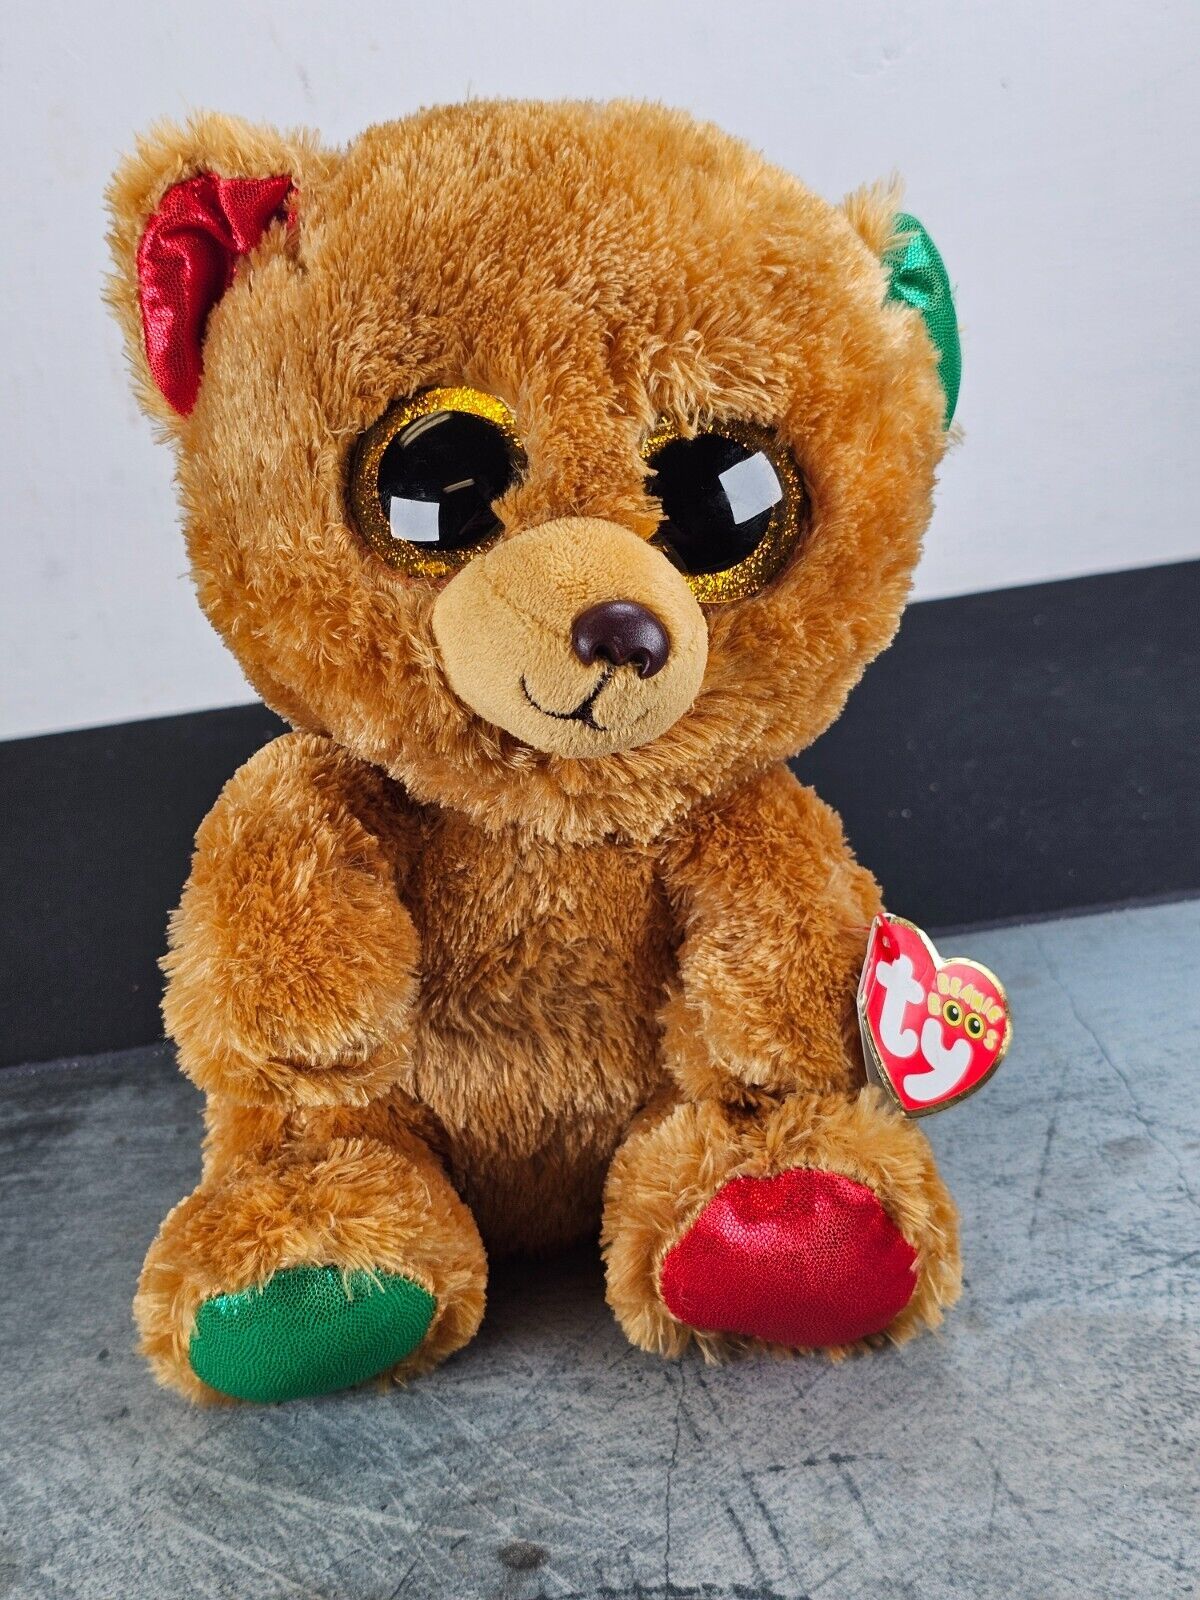 Primary image for 2017 TY Beanie Boos Bella the Christmas Teddy Bear w/Candy Cane and Glitter Eyes